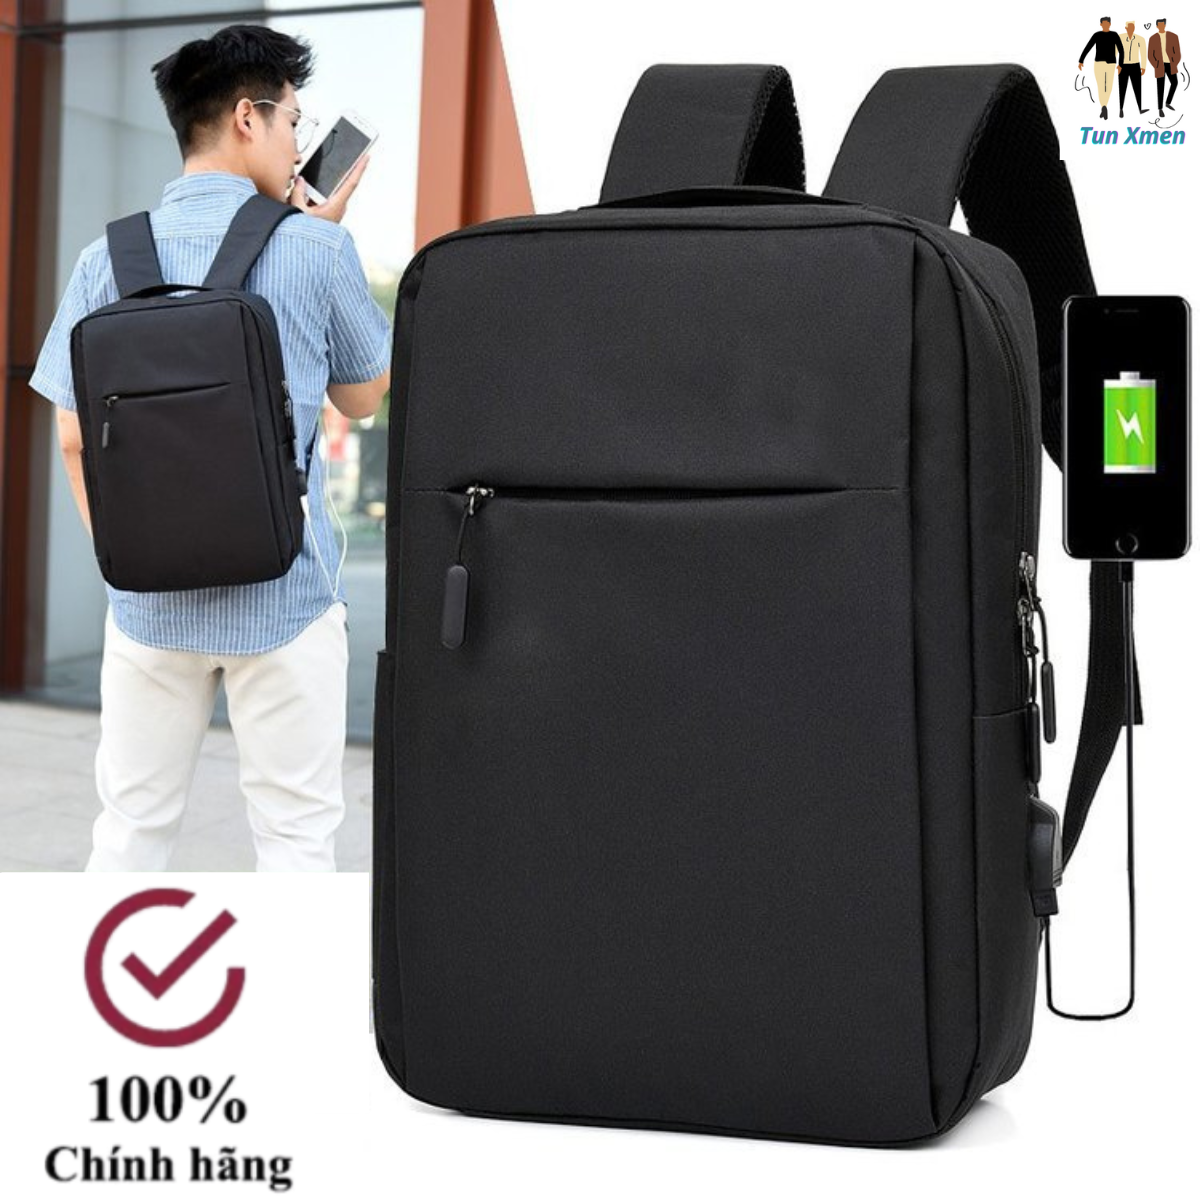 Men s USB charging high quality laptop backpack with laptop compartment